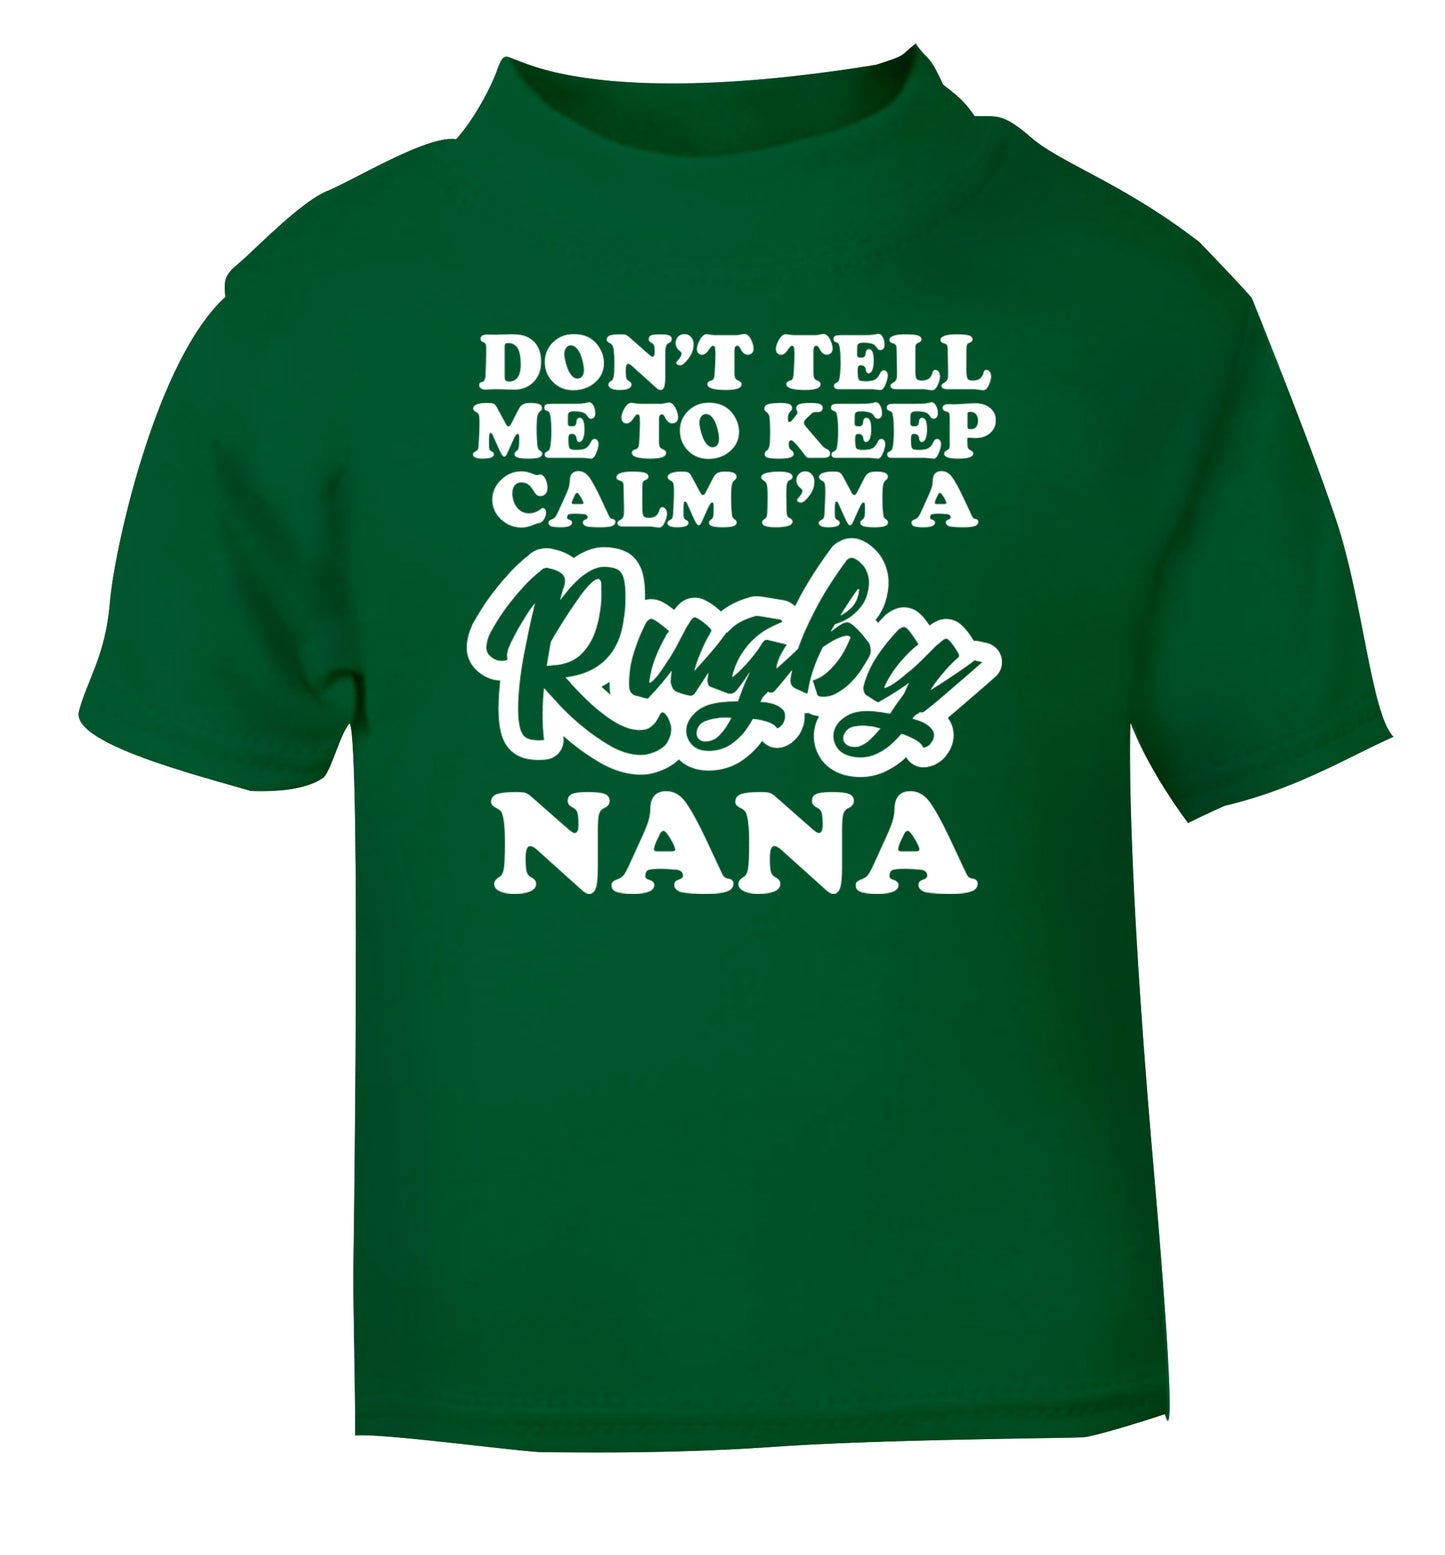 Don't tell me to keep calm I'm a rugby nana green Baby Toddler Tshirt 2 Years